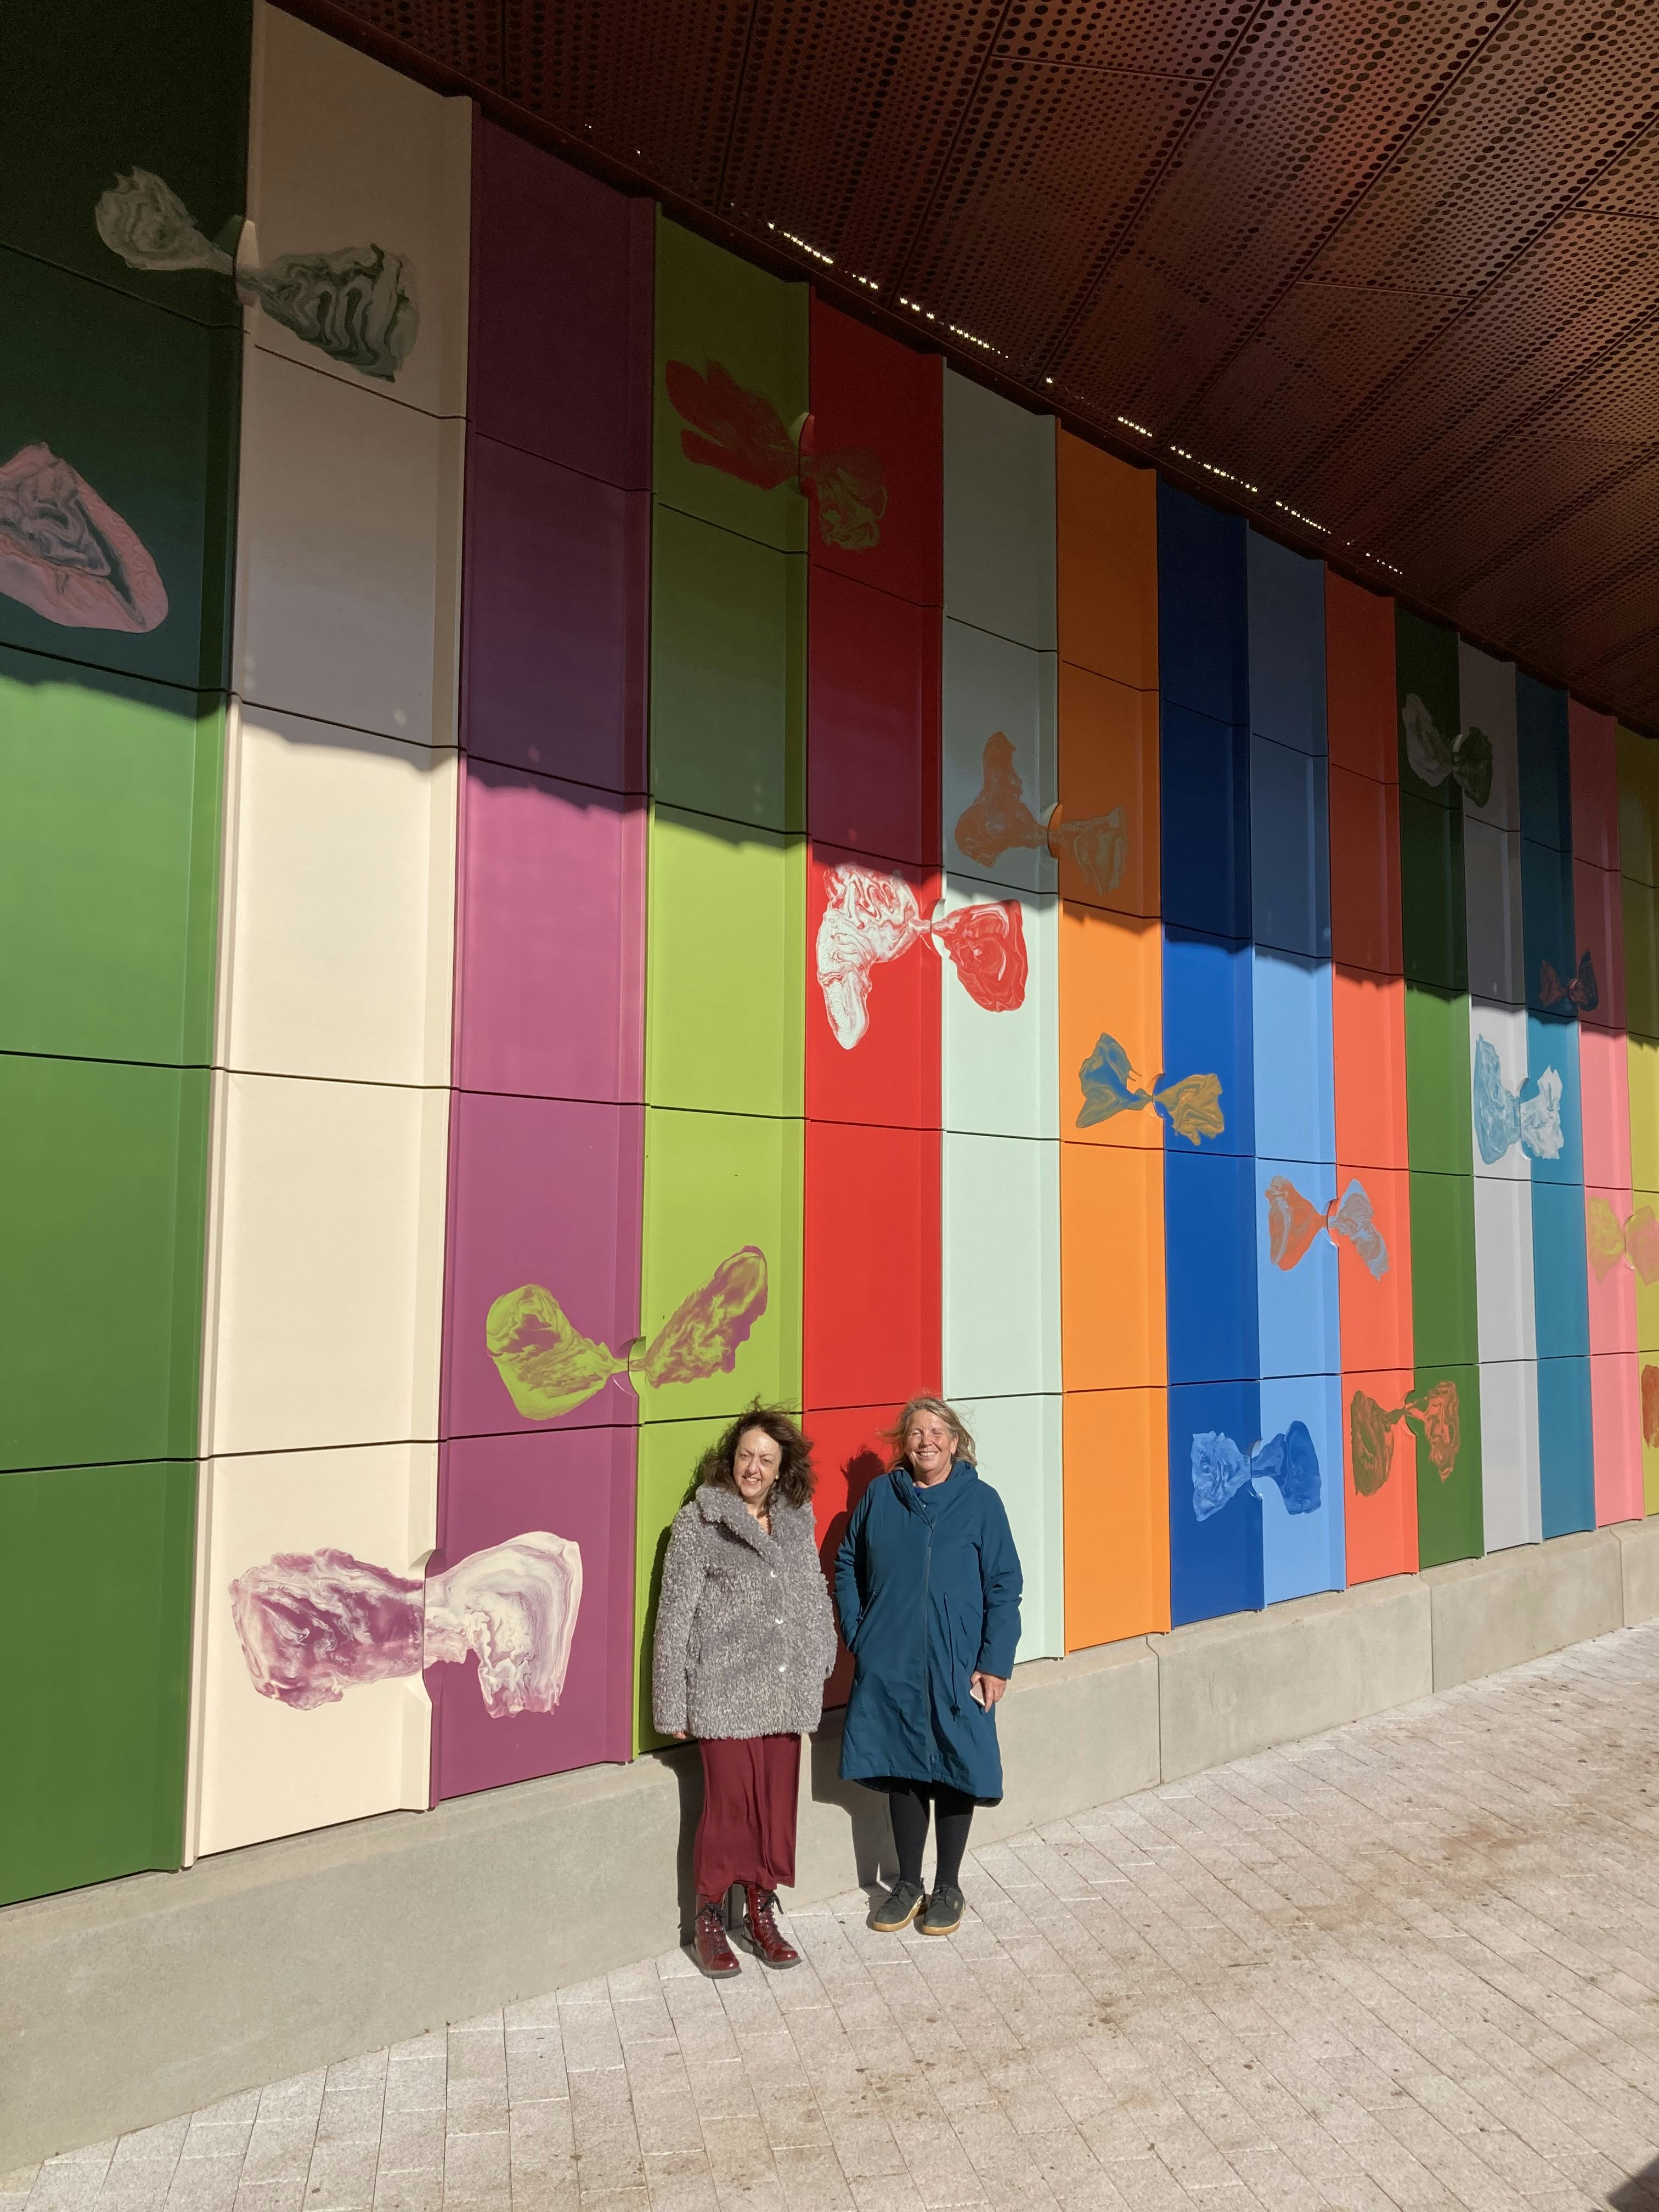 Two women stand in front of an artwork of large, colourful tiles